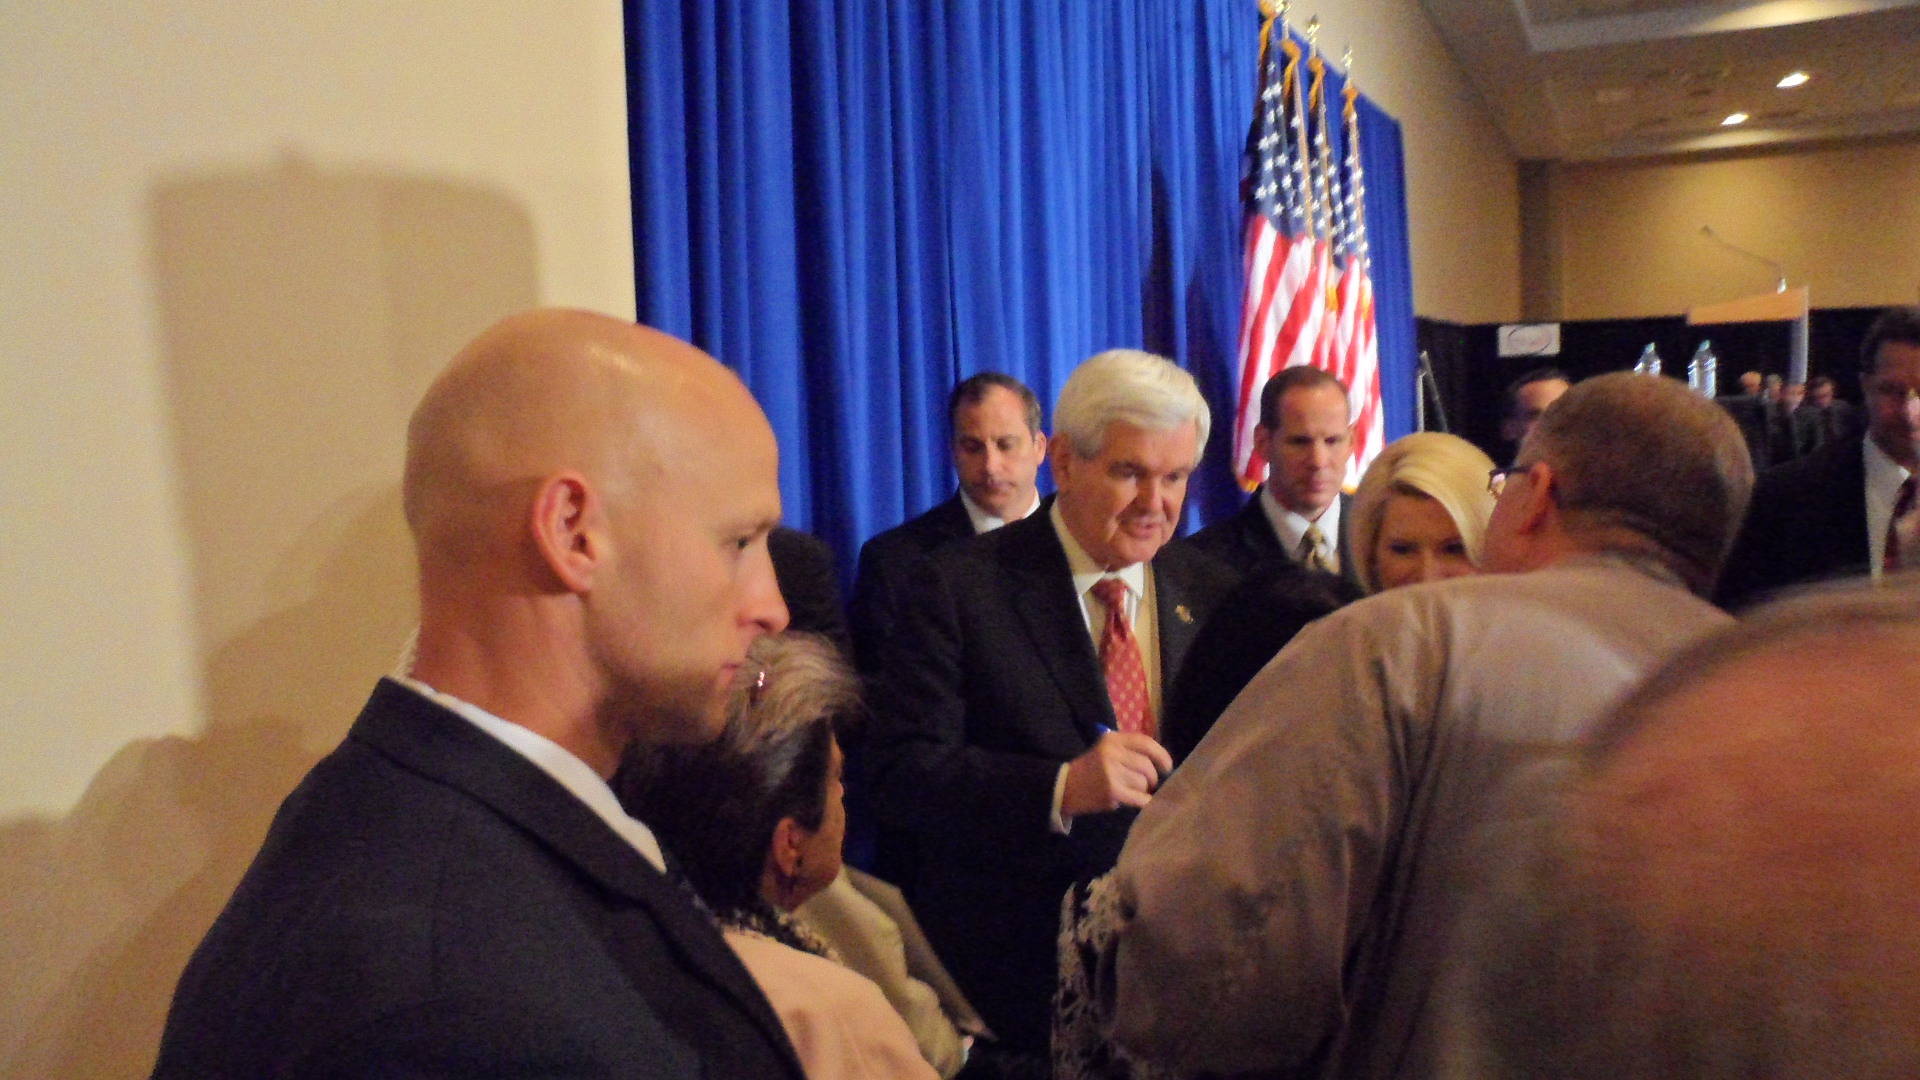 Conducting Executive Protection for Presidential Candidate Newt Gingrich and his wife.